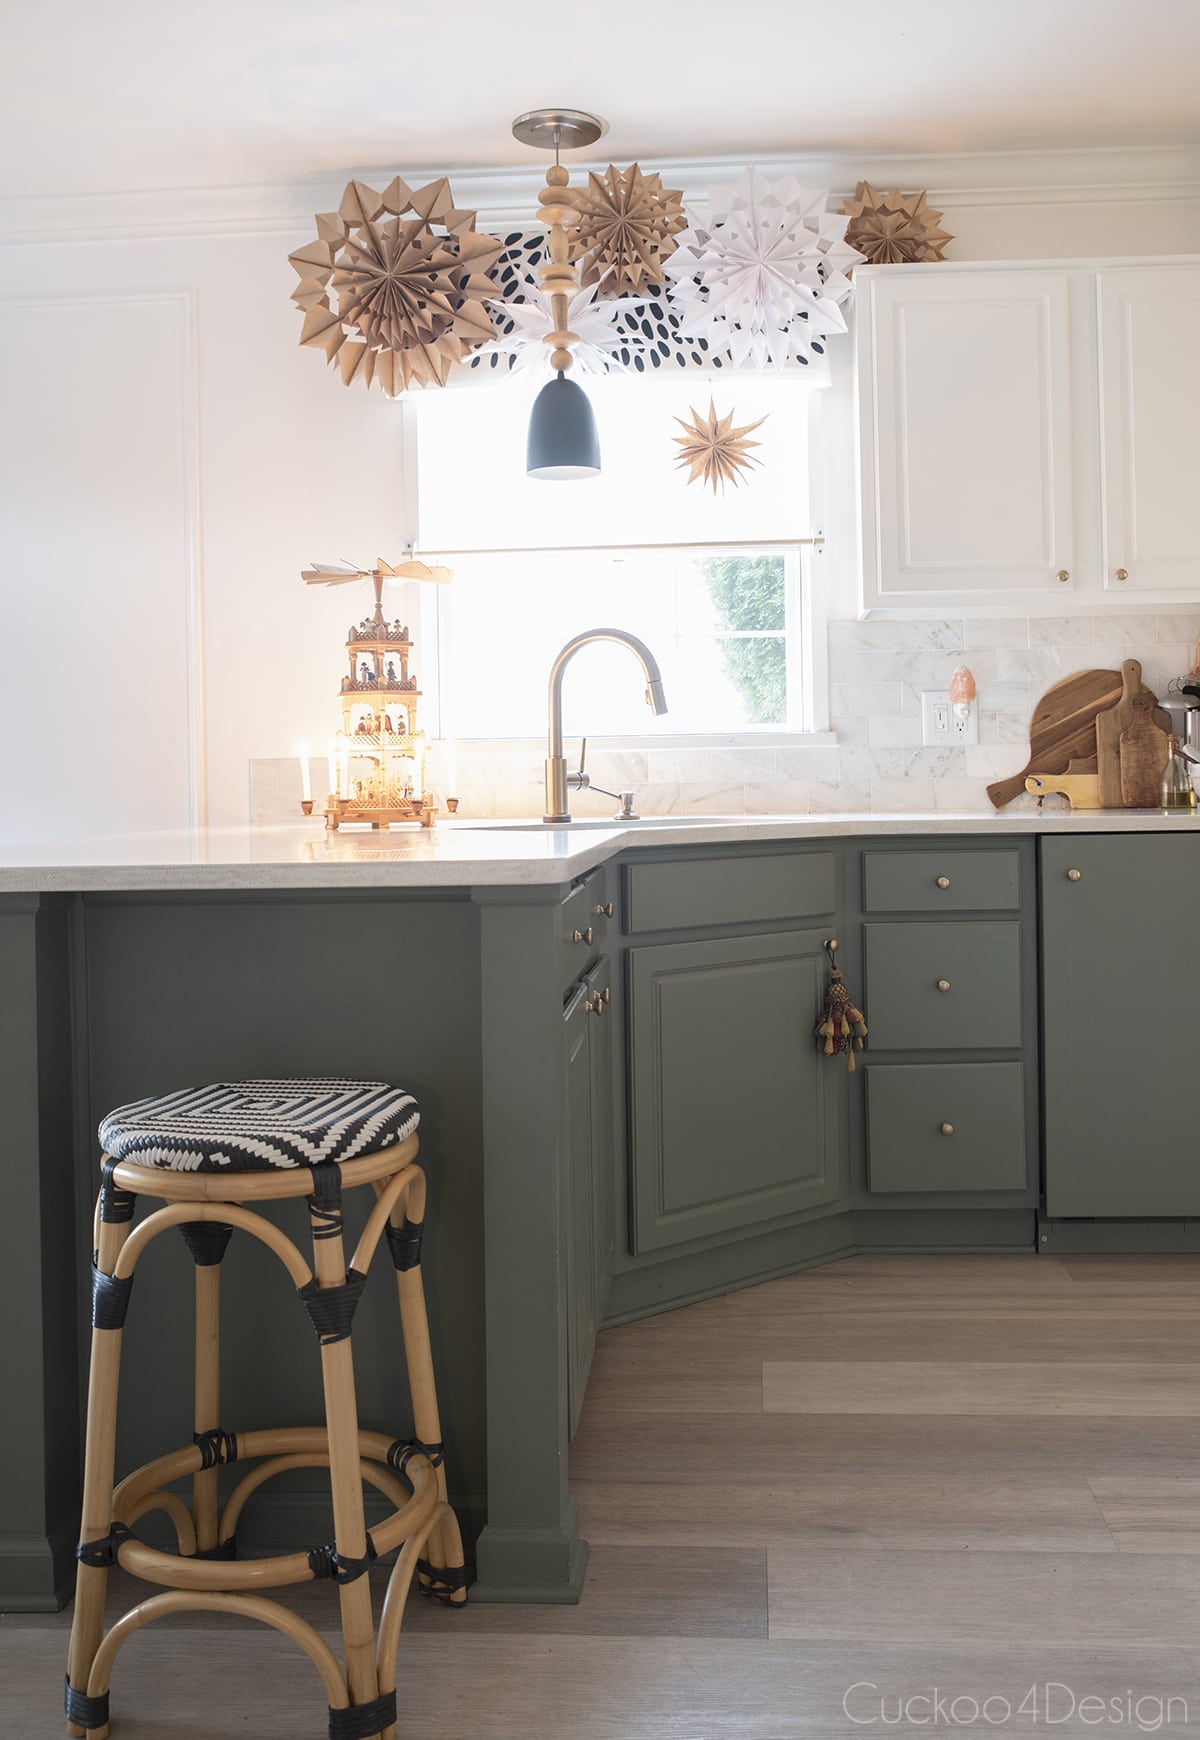 two-toned green and white kitchen with paper snowflakes for Christmas